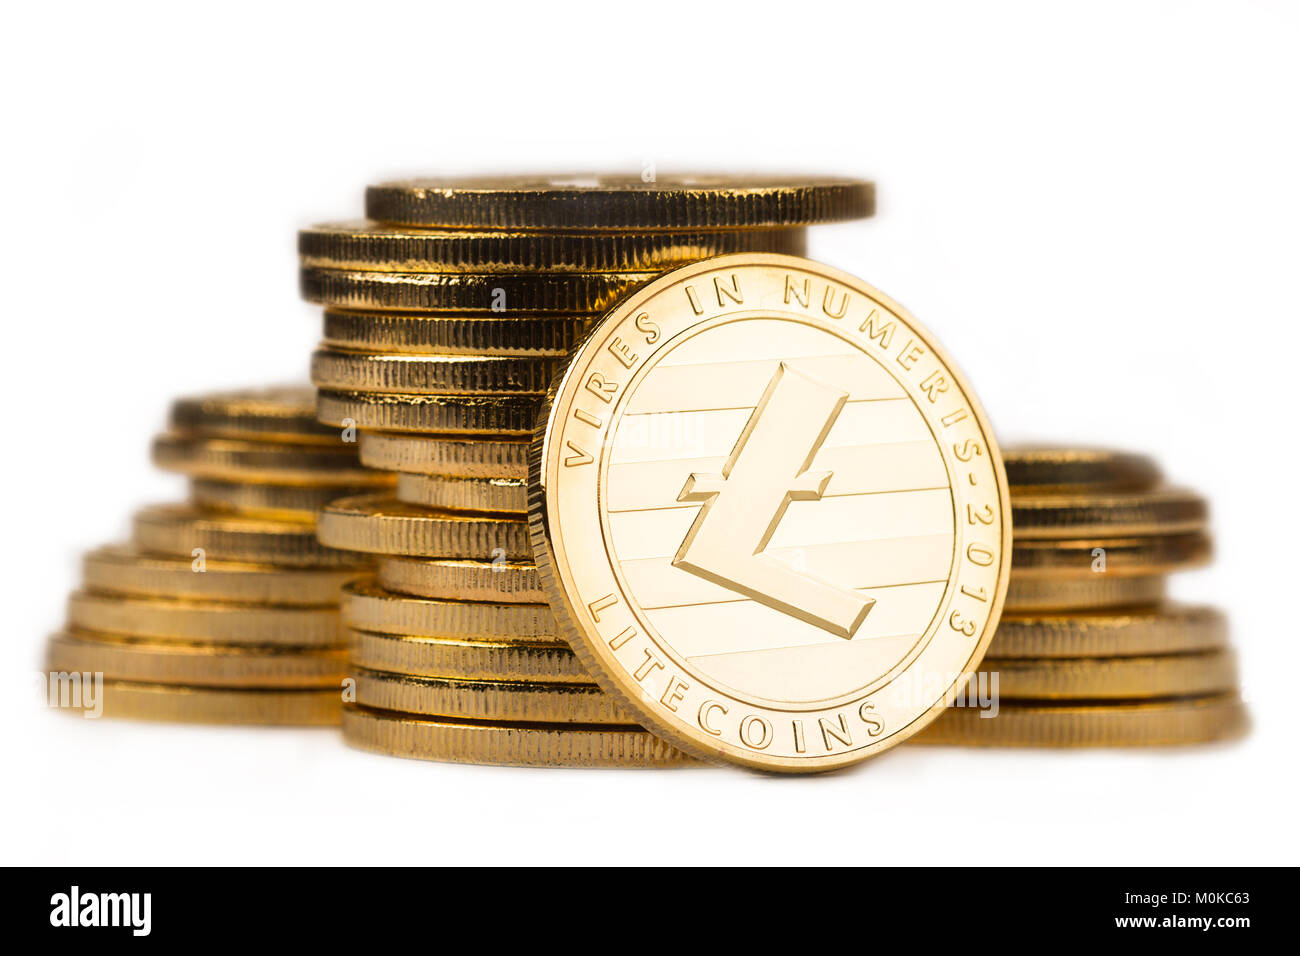 close up golden litecoin in front of a pile of golden metallic coins isolated on white background Stock Photo